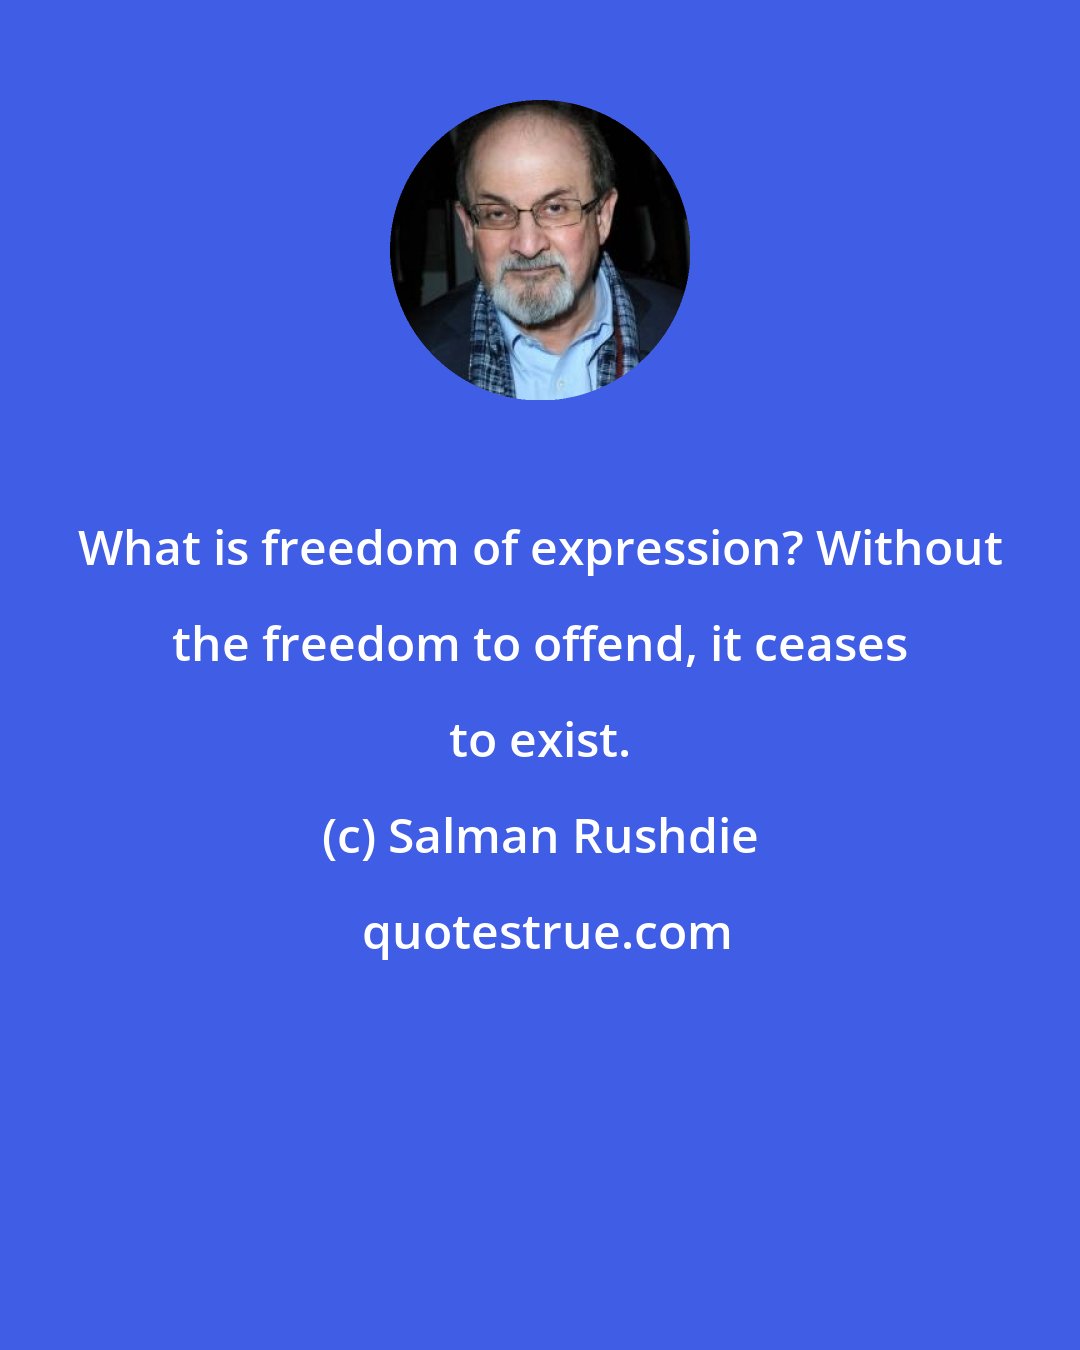 Salman Rushdie: What is freedom of expression? Without the freedom to offend, it ceases to exist.